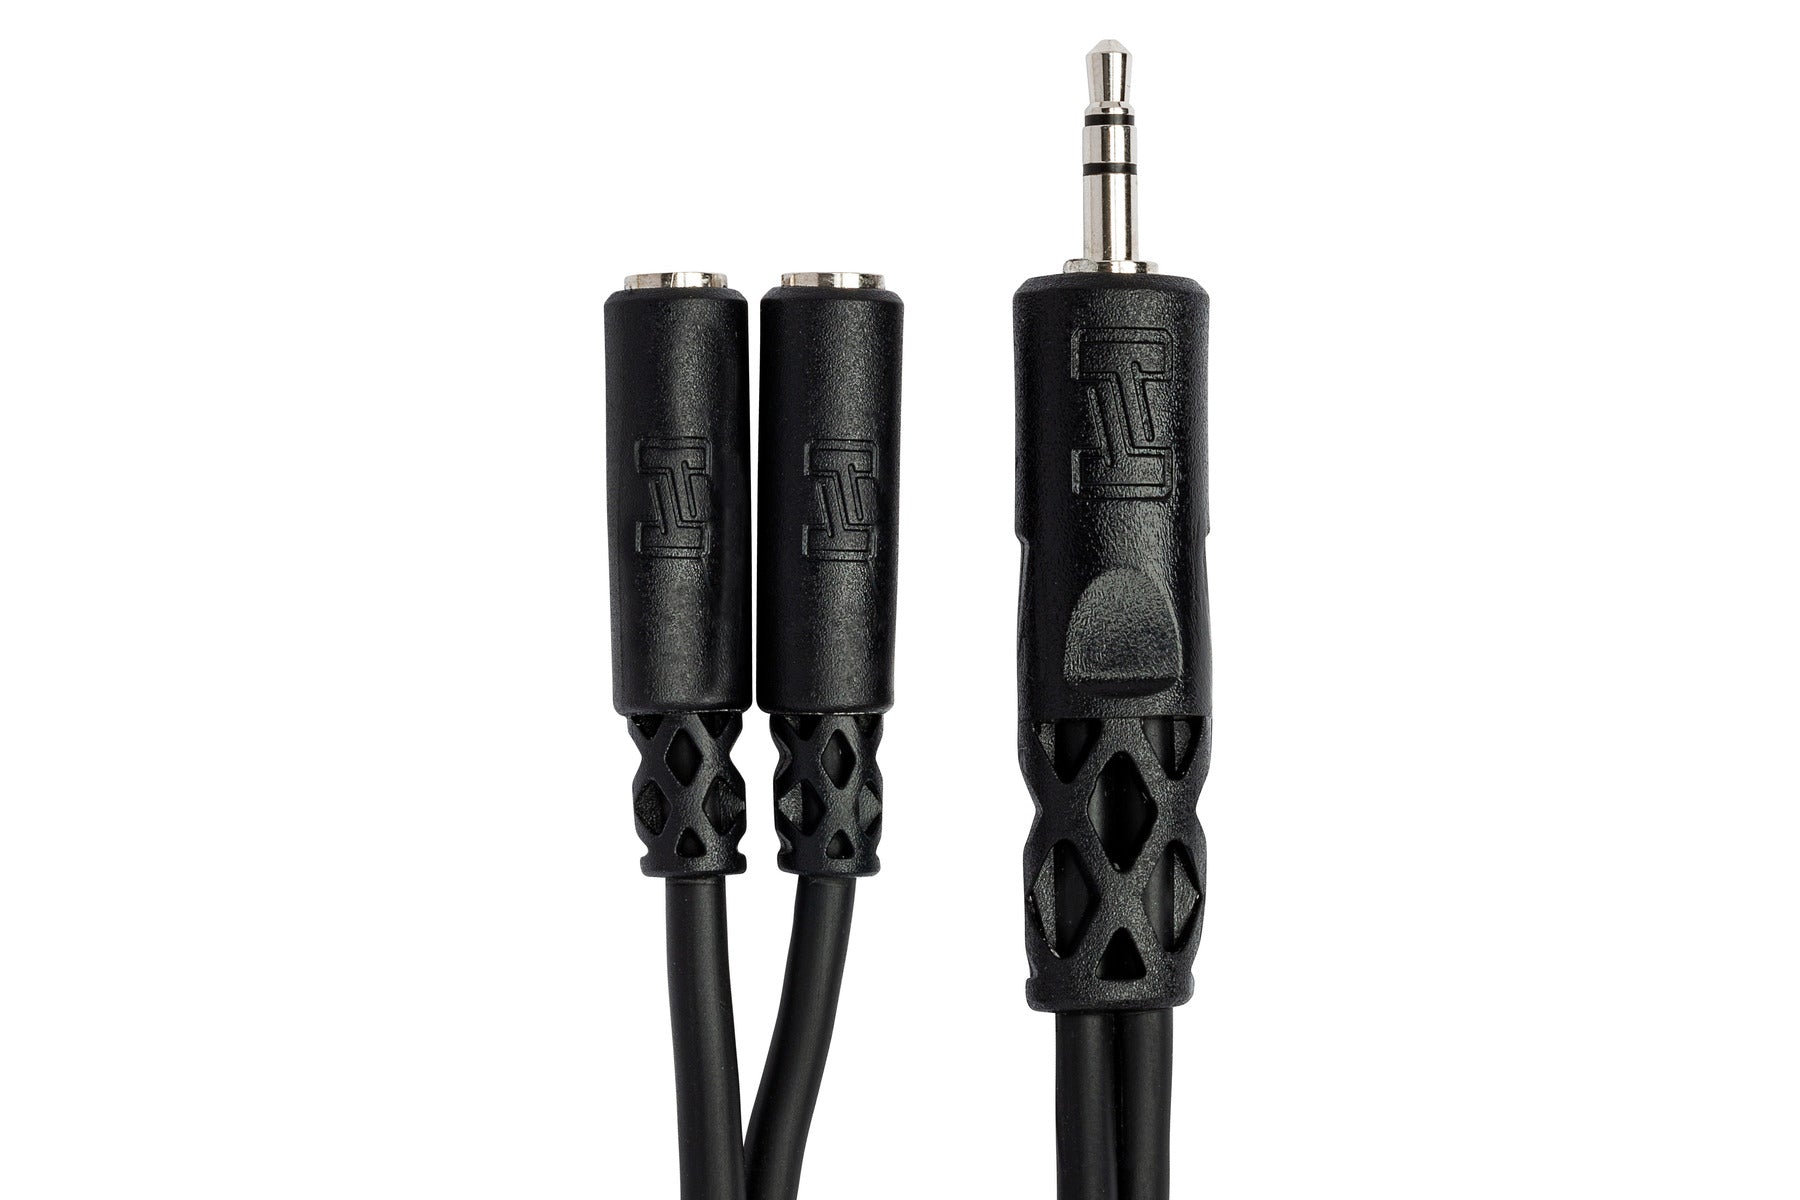 Hosa YMM-232 Y Cable, 3.5 mm TRS to Dual 3.5 mm TRSF